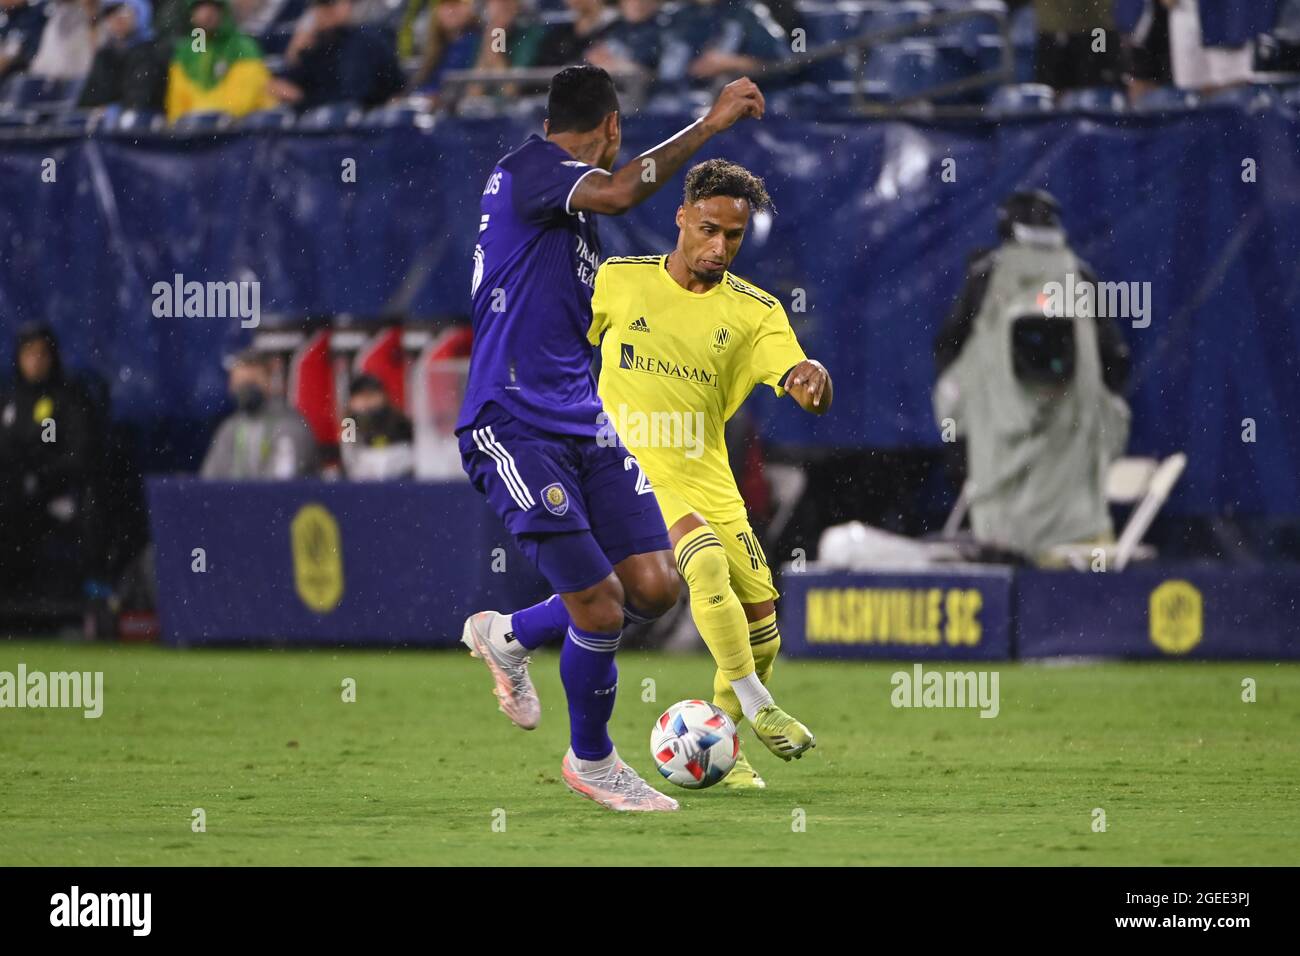 August 18, 2021: Nashville midfielder, Hany Mukhtar (10), moves the ball downfield during the MLS match between Orlando City SC and Nashville SC at Nissan Stadium in Nashville, TN. Kevin Langley/CSM Stock Photo